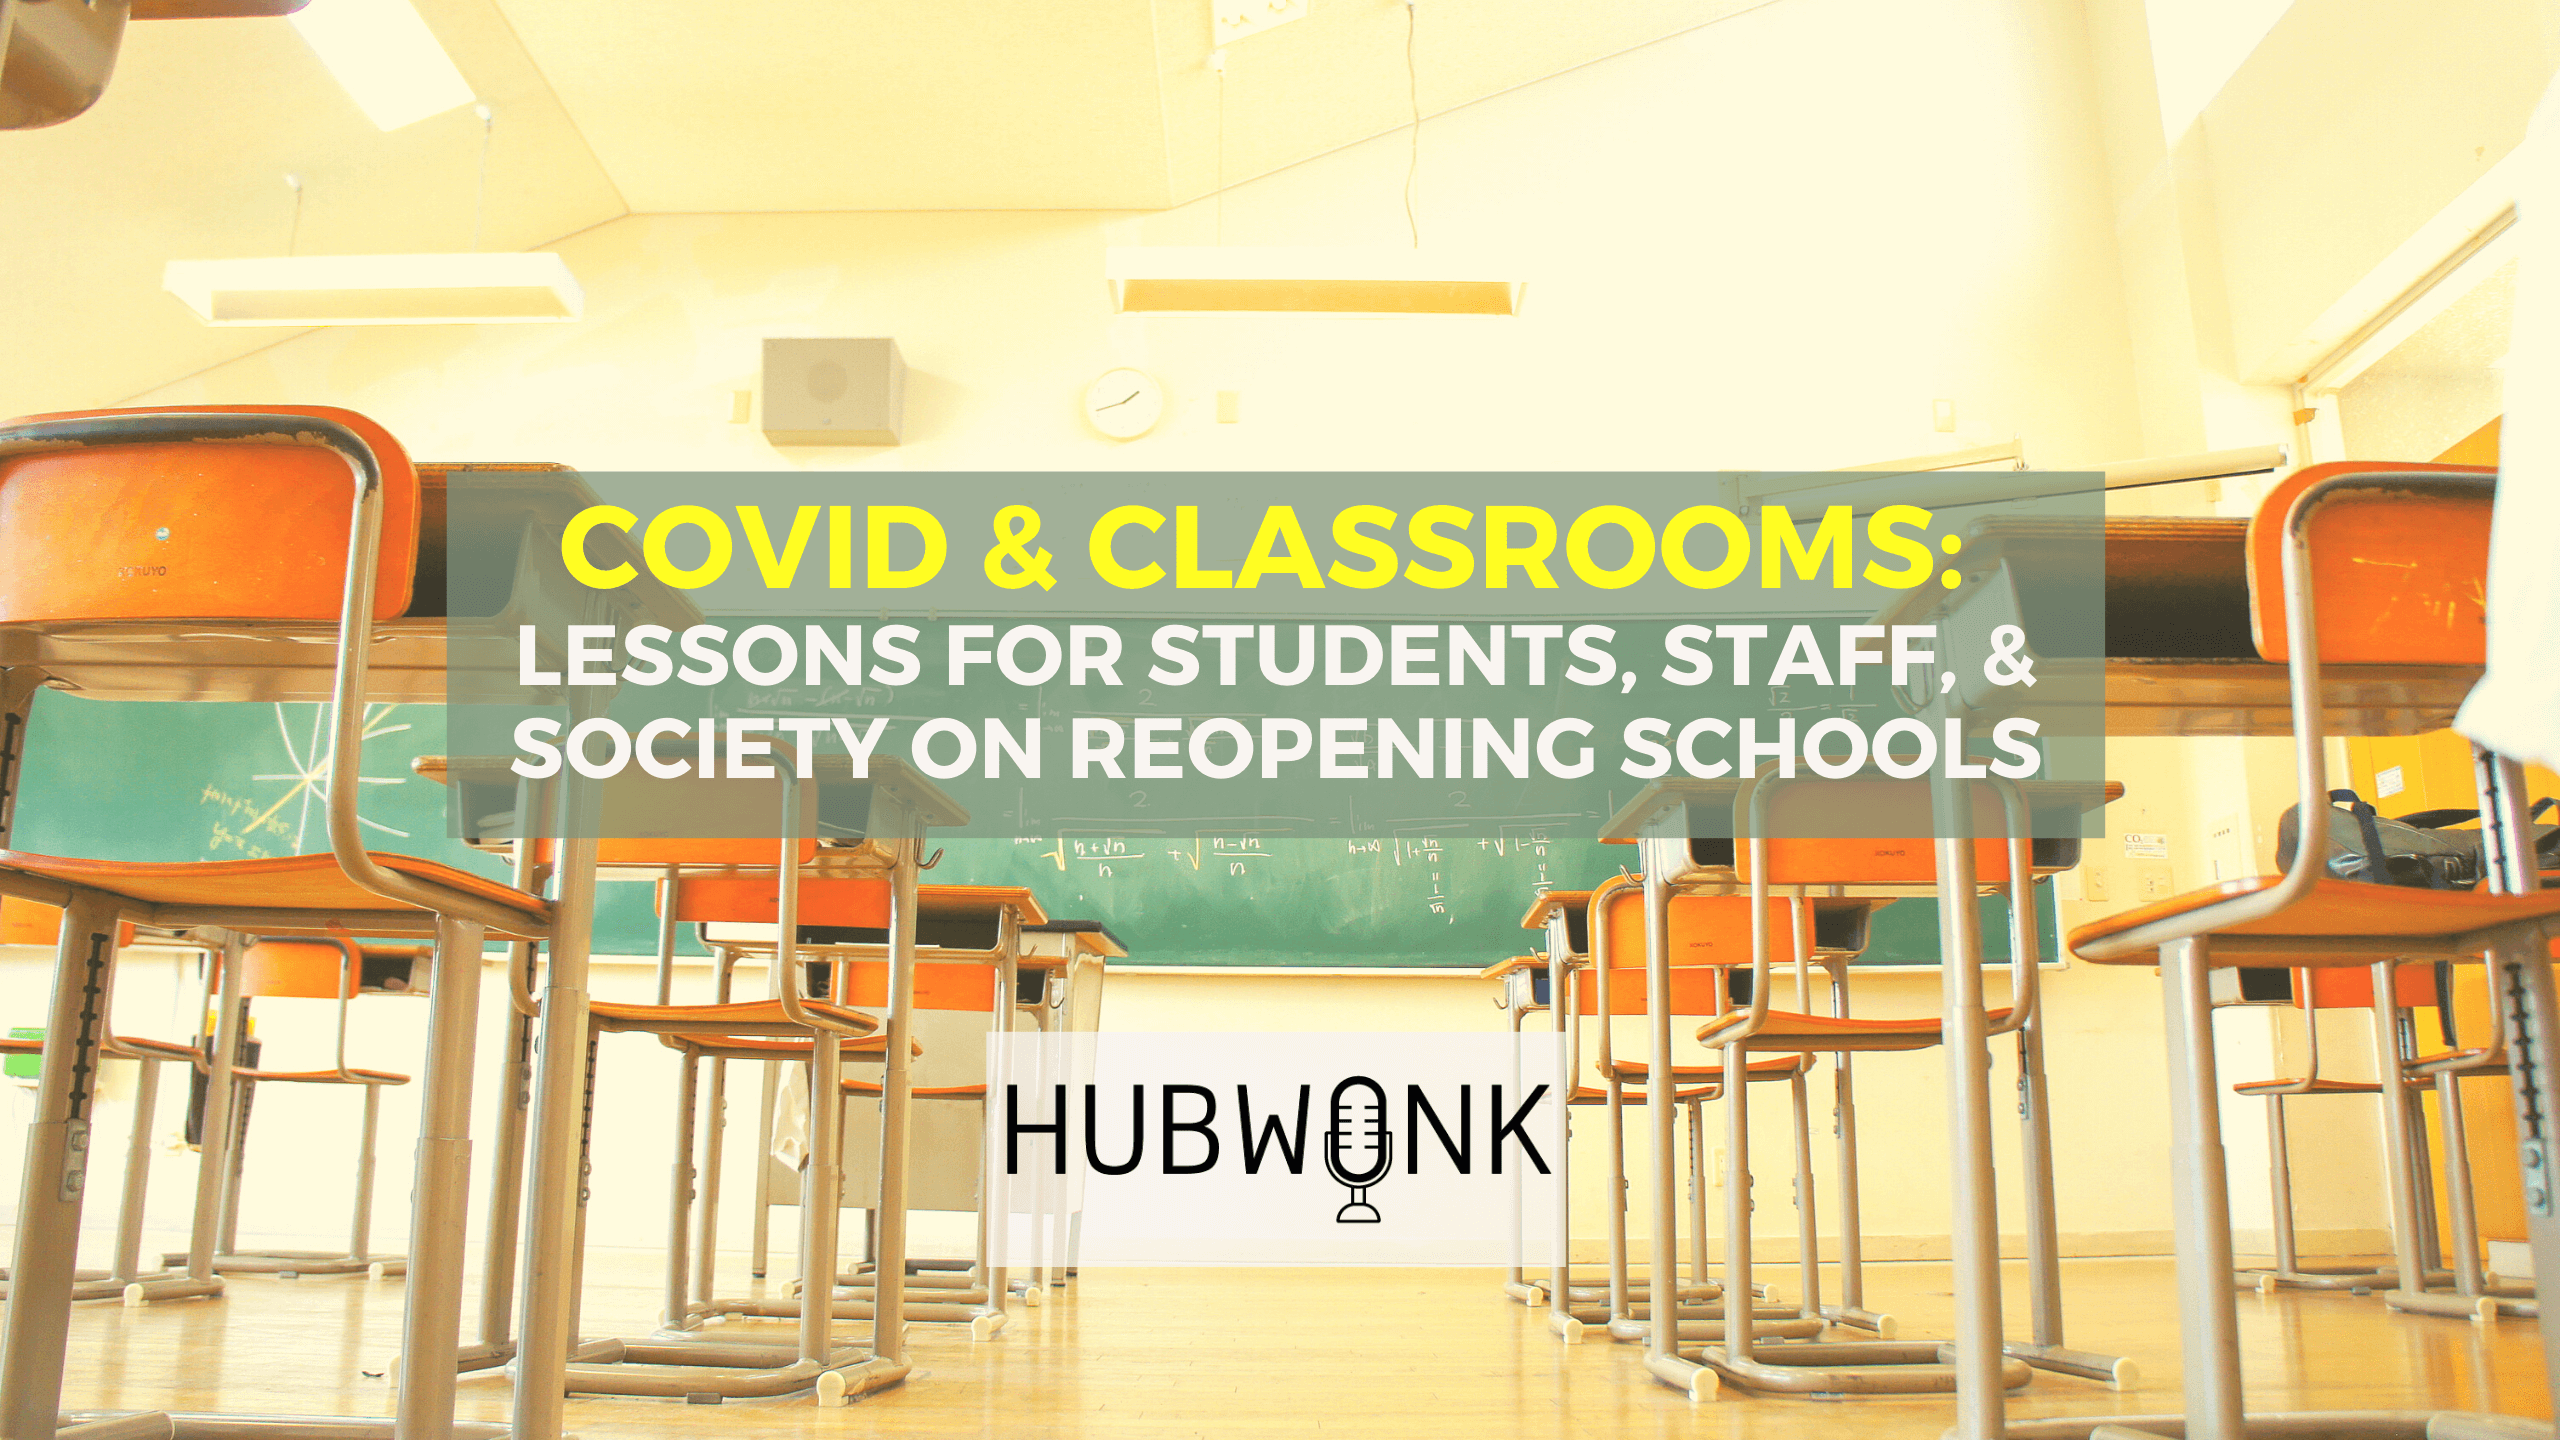 COVID & Classrooms: Lessons for Students, Staff, & Society on Reopening Schools